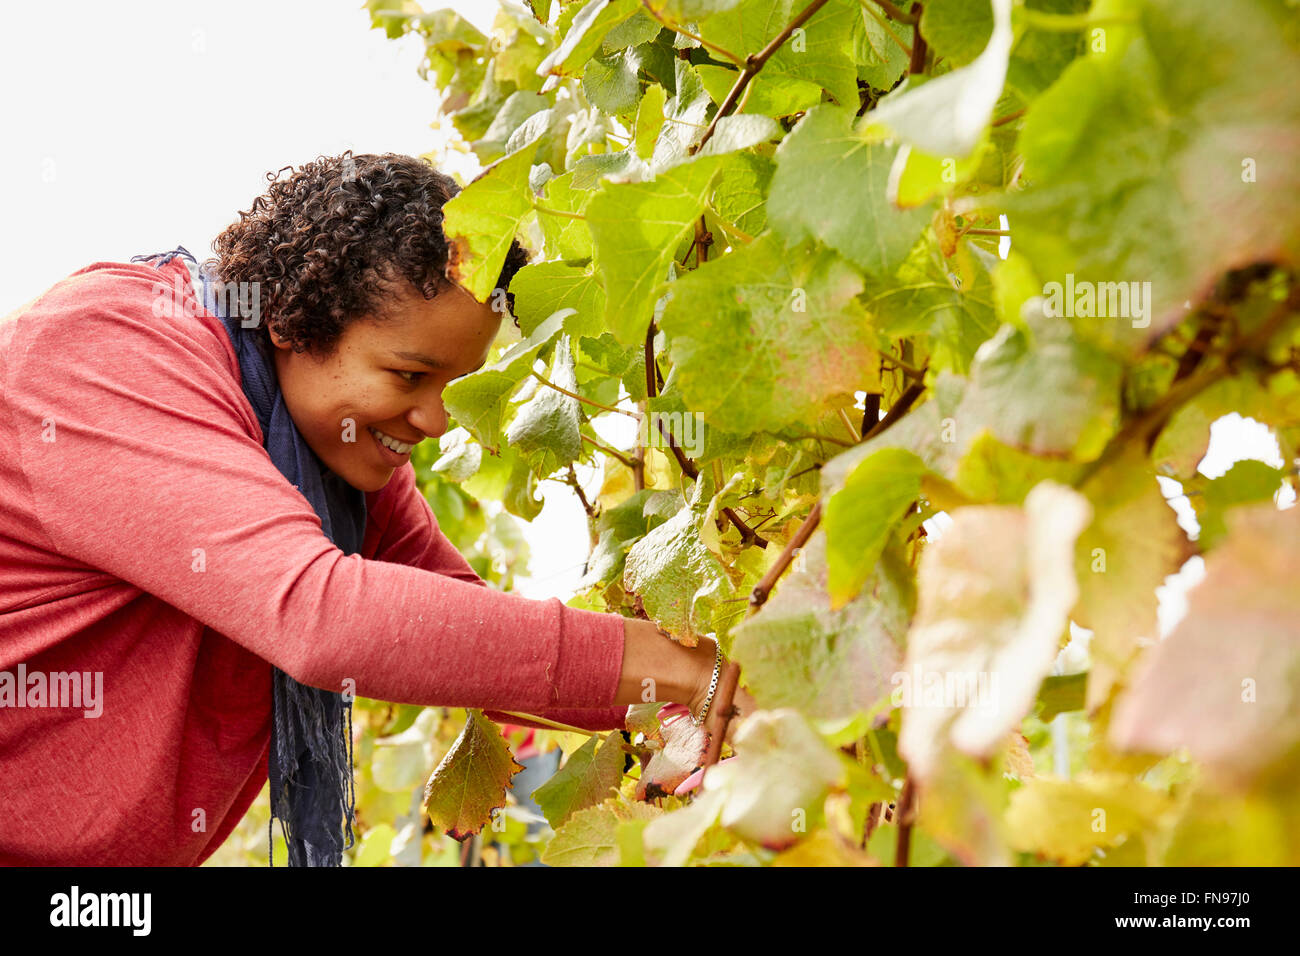 A grape picker leaning down and selecting bunches of grapes for harvest. Stock Photo